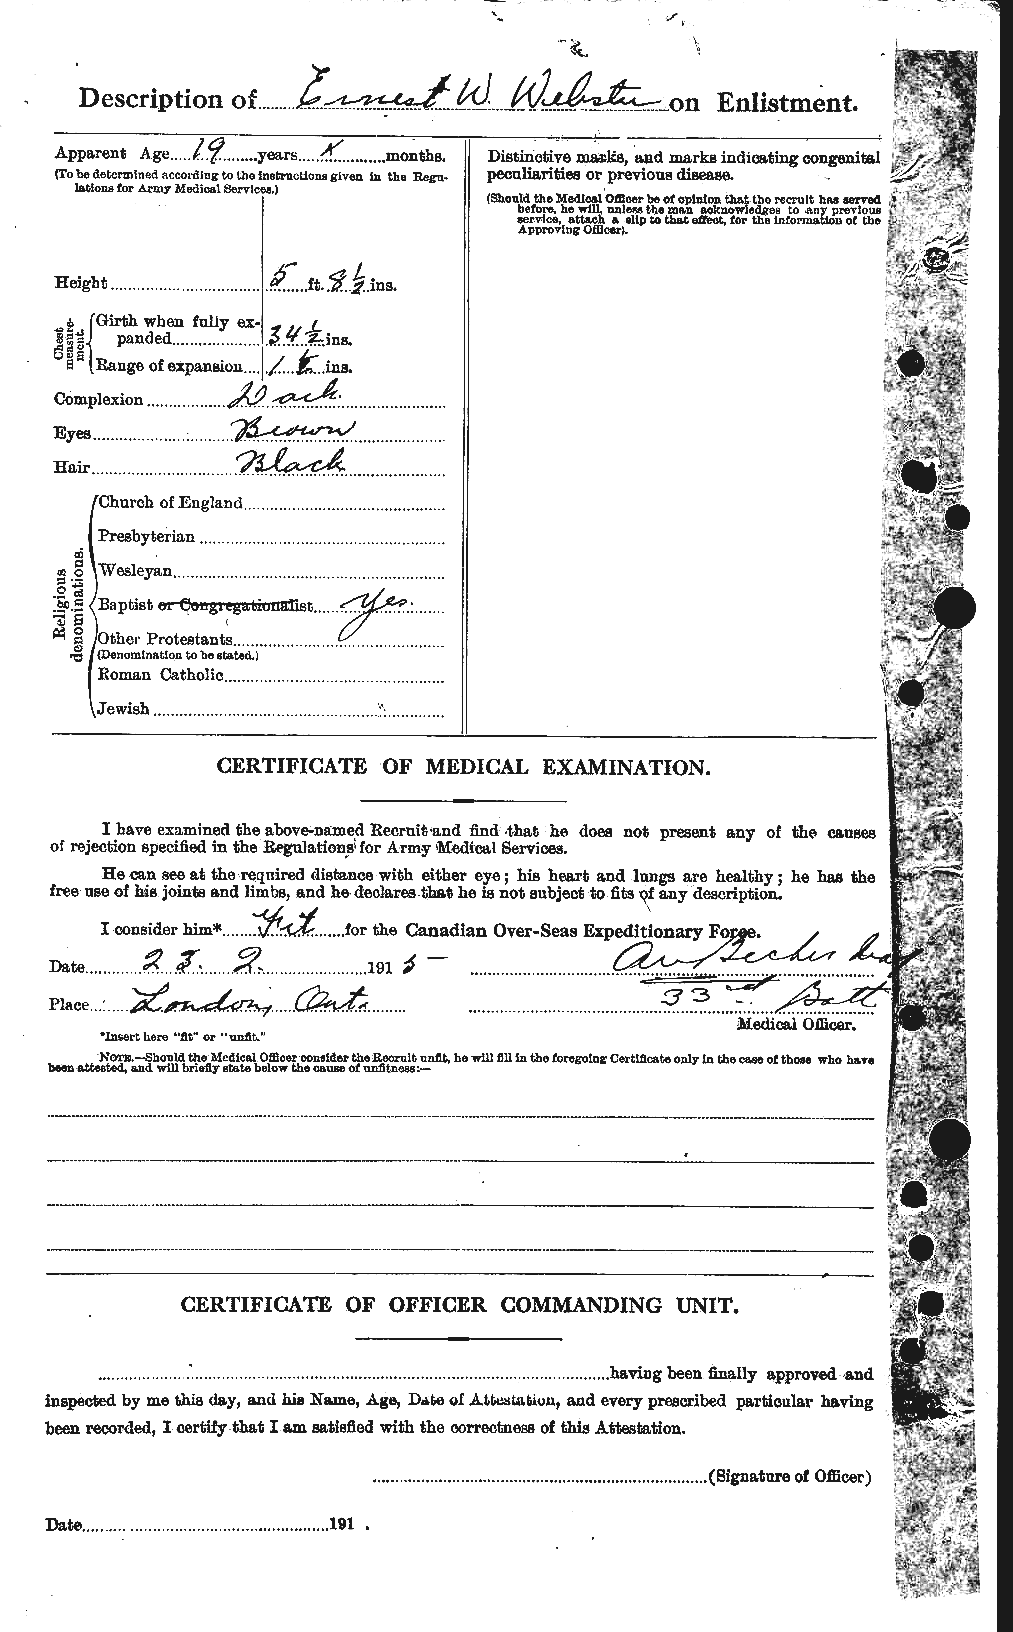 Personnel Records of the First World War - CEF 670343b